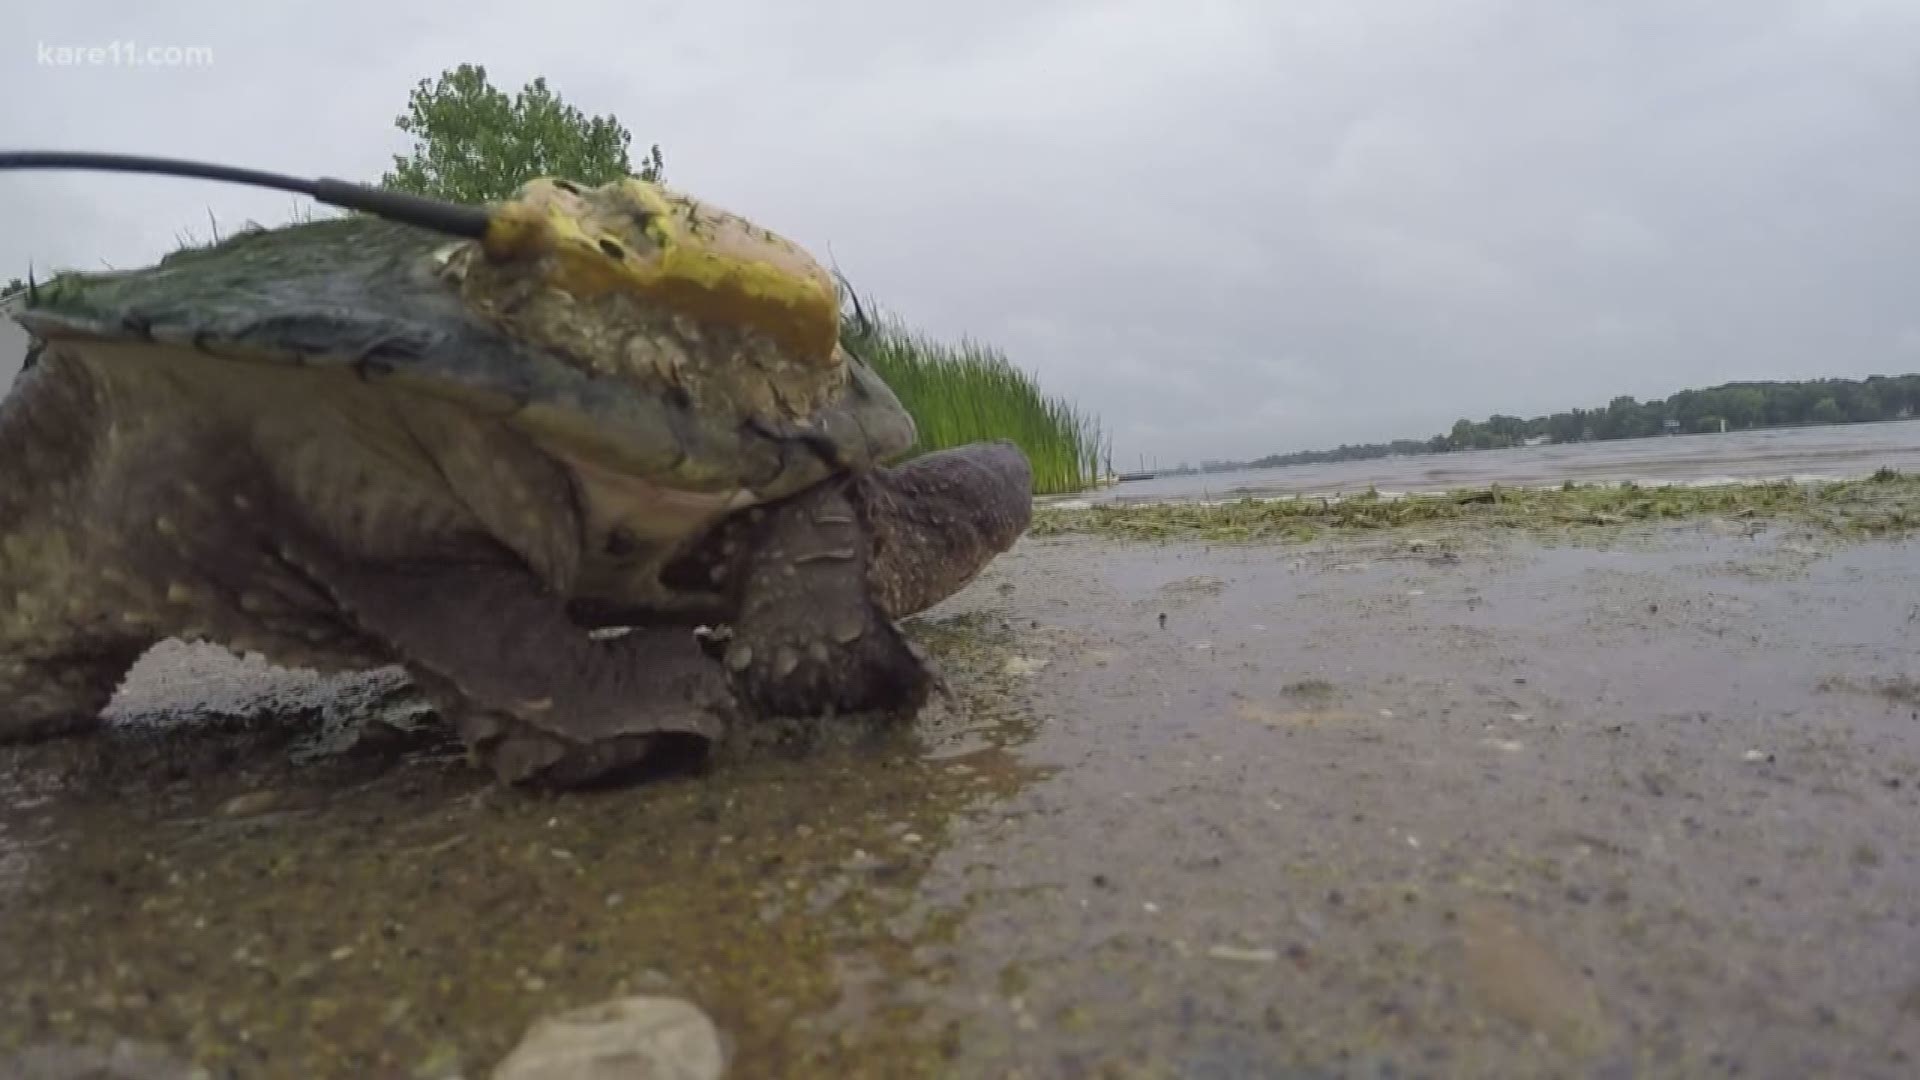 A three-year study on three types of turtles on Medicine Lake involving Three Rivers Park District and Students from the University of St. Thomas is complete. https://kare11.tv/2w1uusk